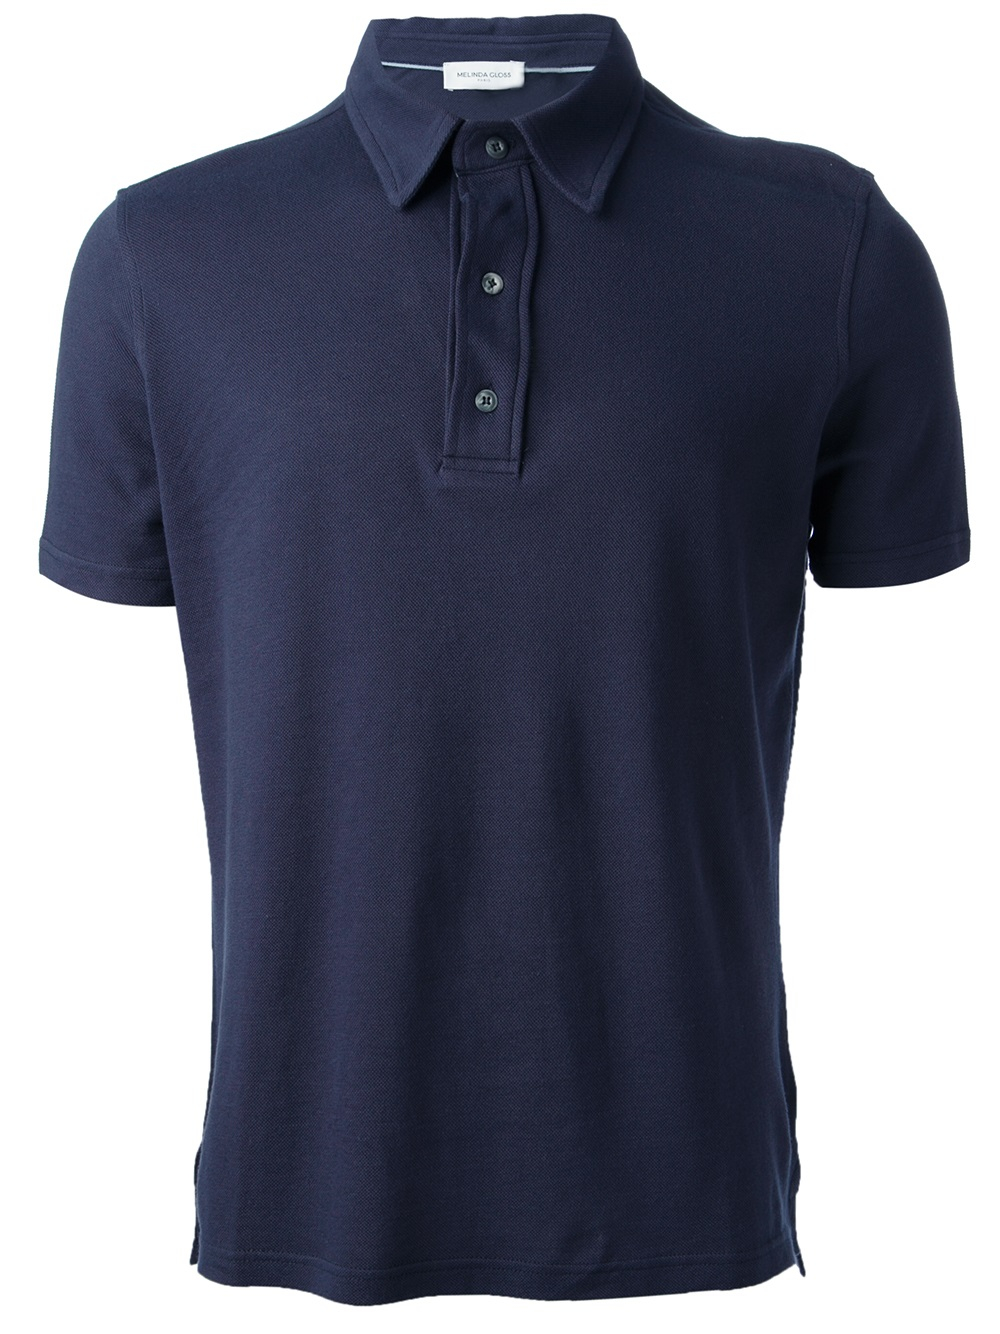 Lyst - Éditions Mr Classic Polo Shirt in Blue for Men